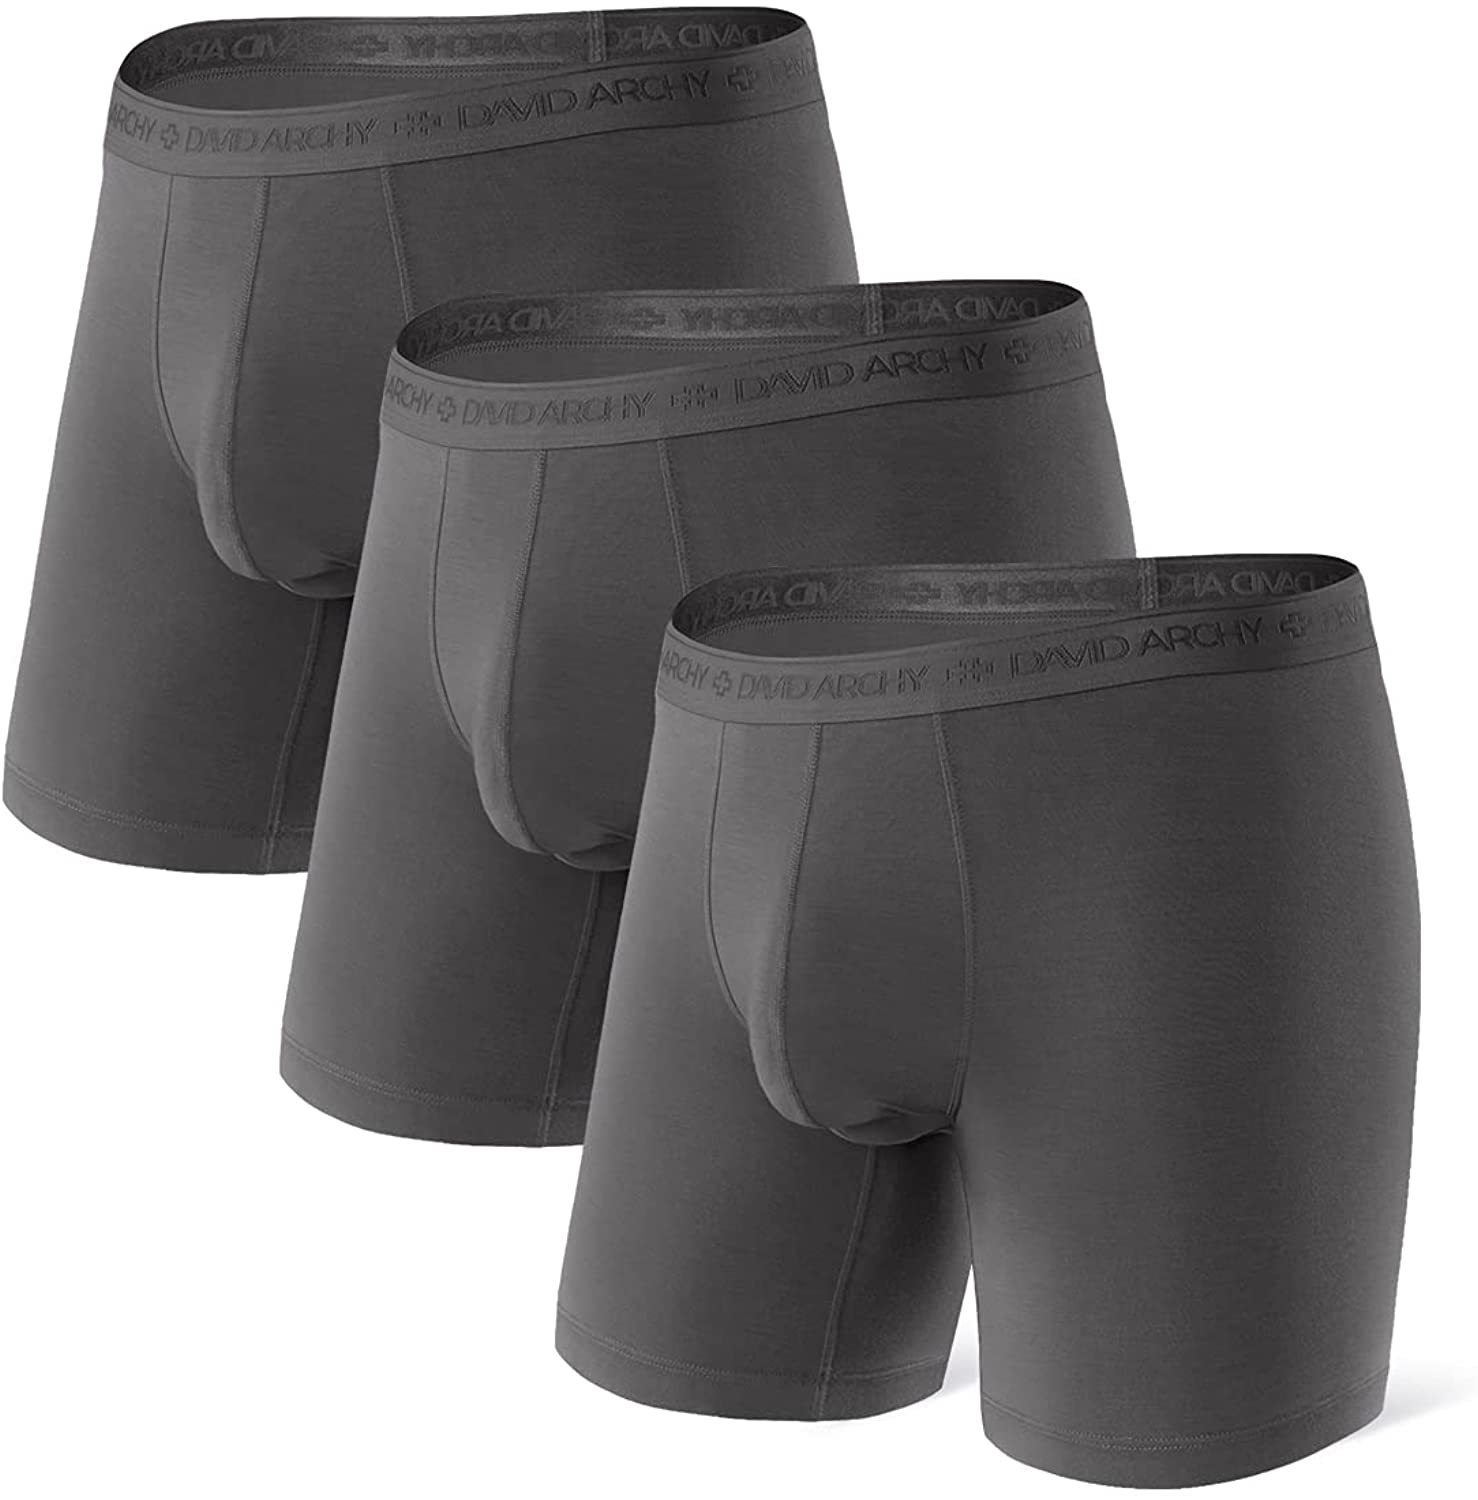 David Archy 3 Packs MicroModal Boxer Briefs with Pouch Support